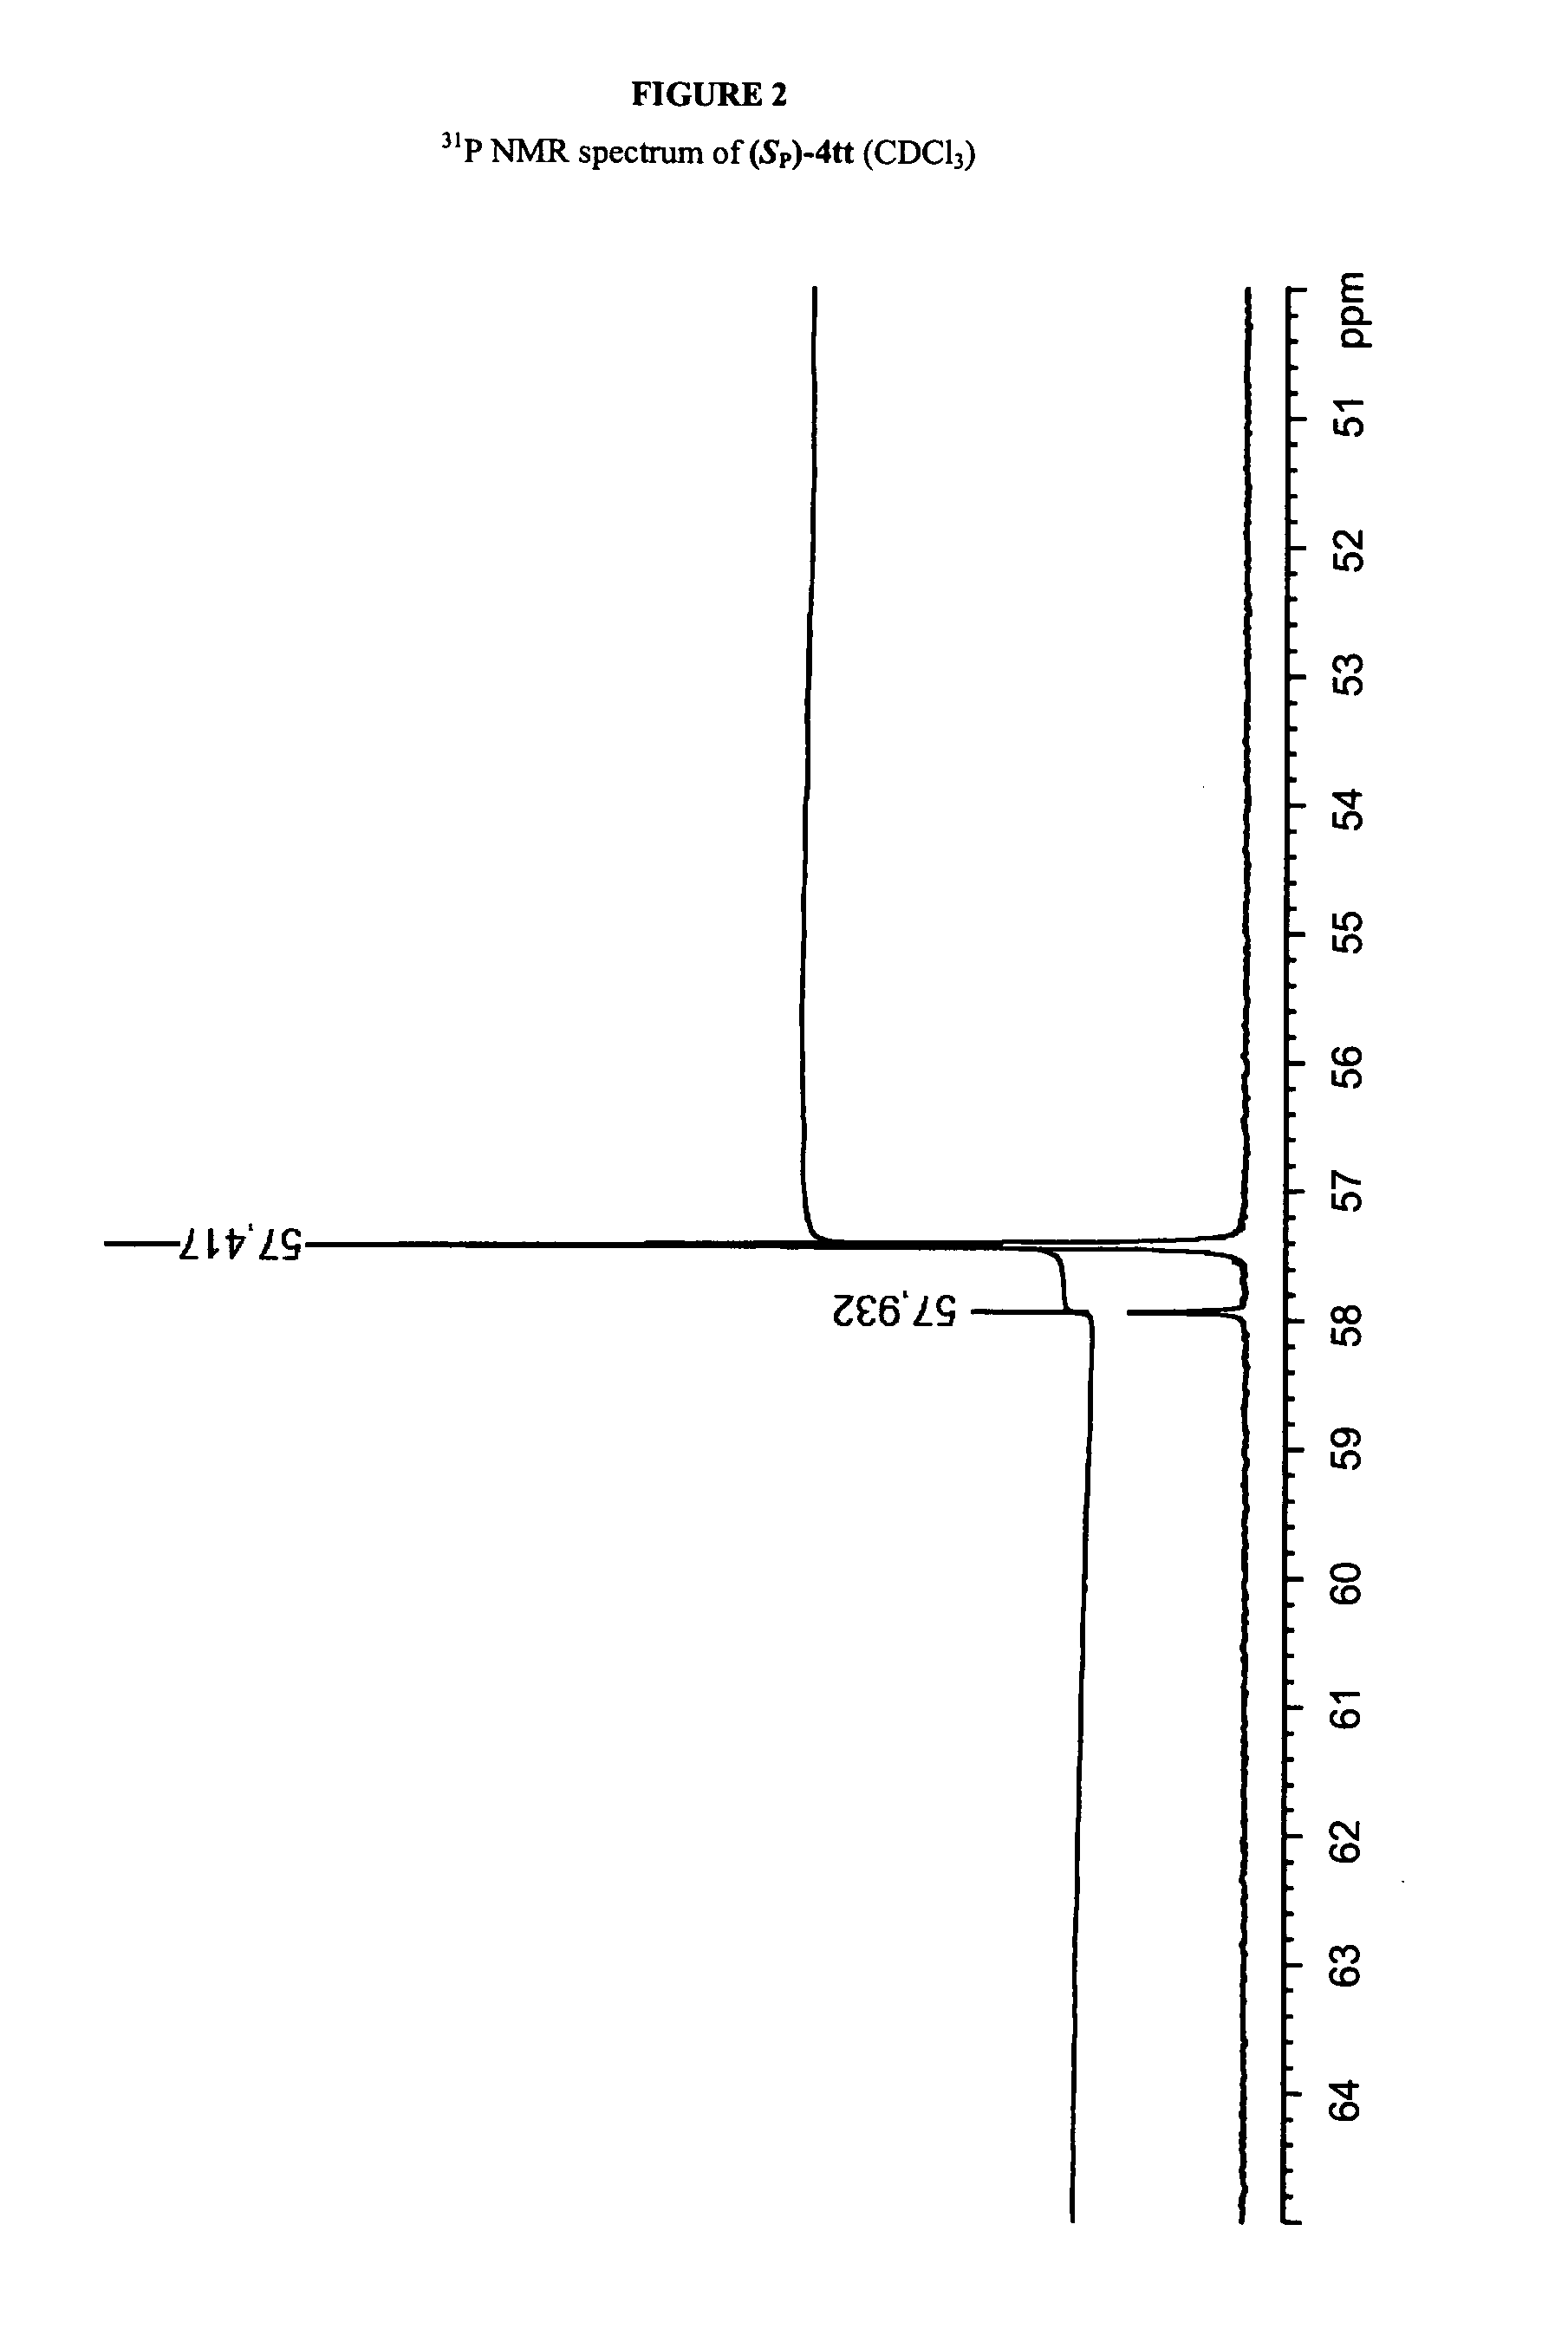 Method for the synthesis of phosphorus atom modified nucleic acids